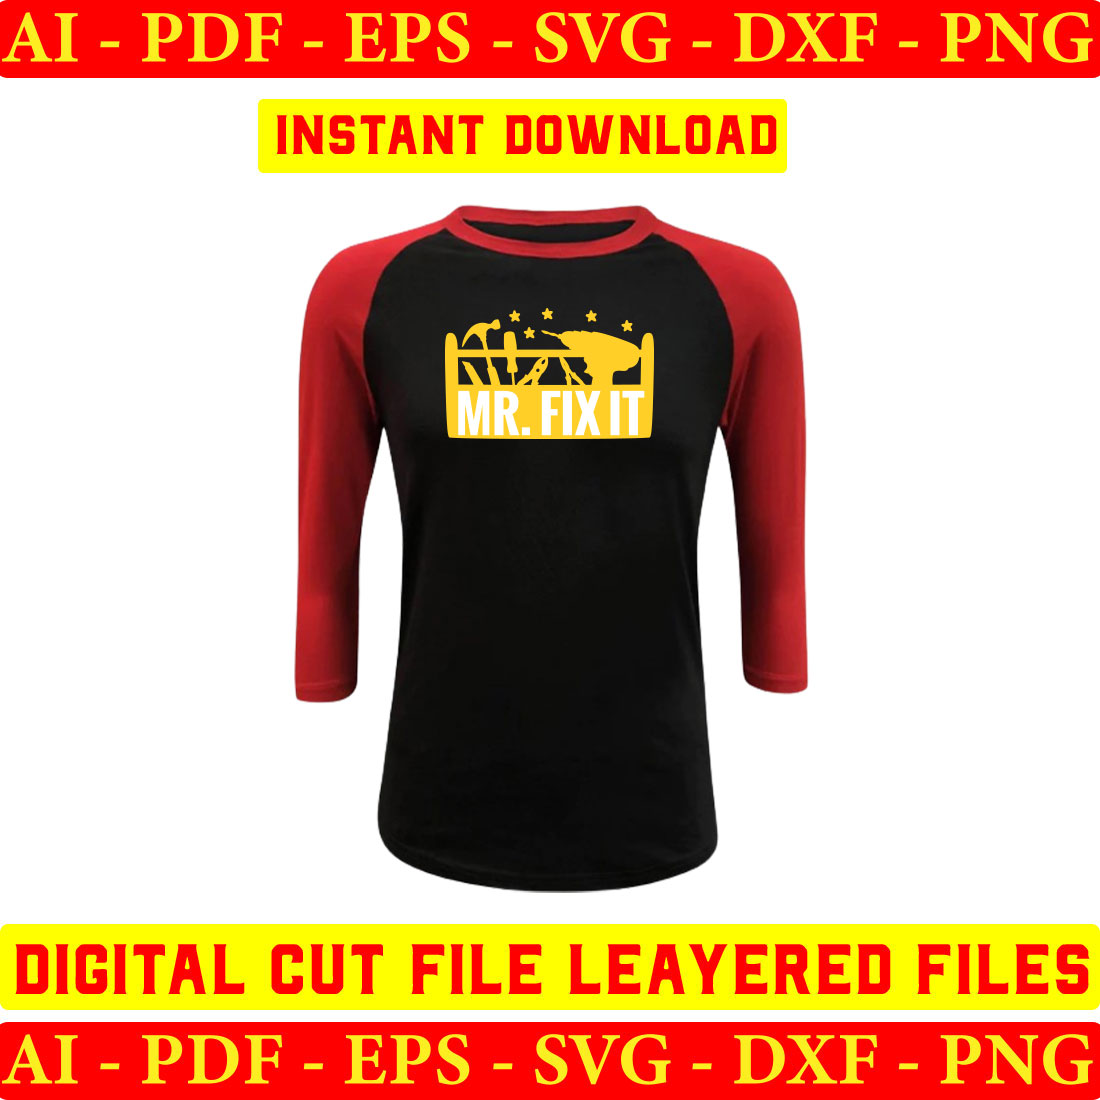 Black and red baseball shirt with a yellow print.